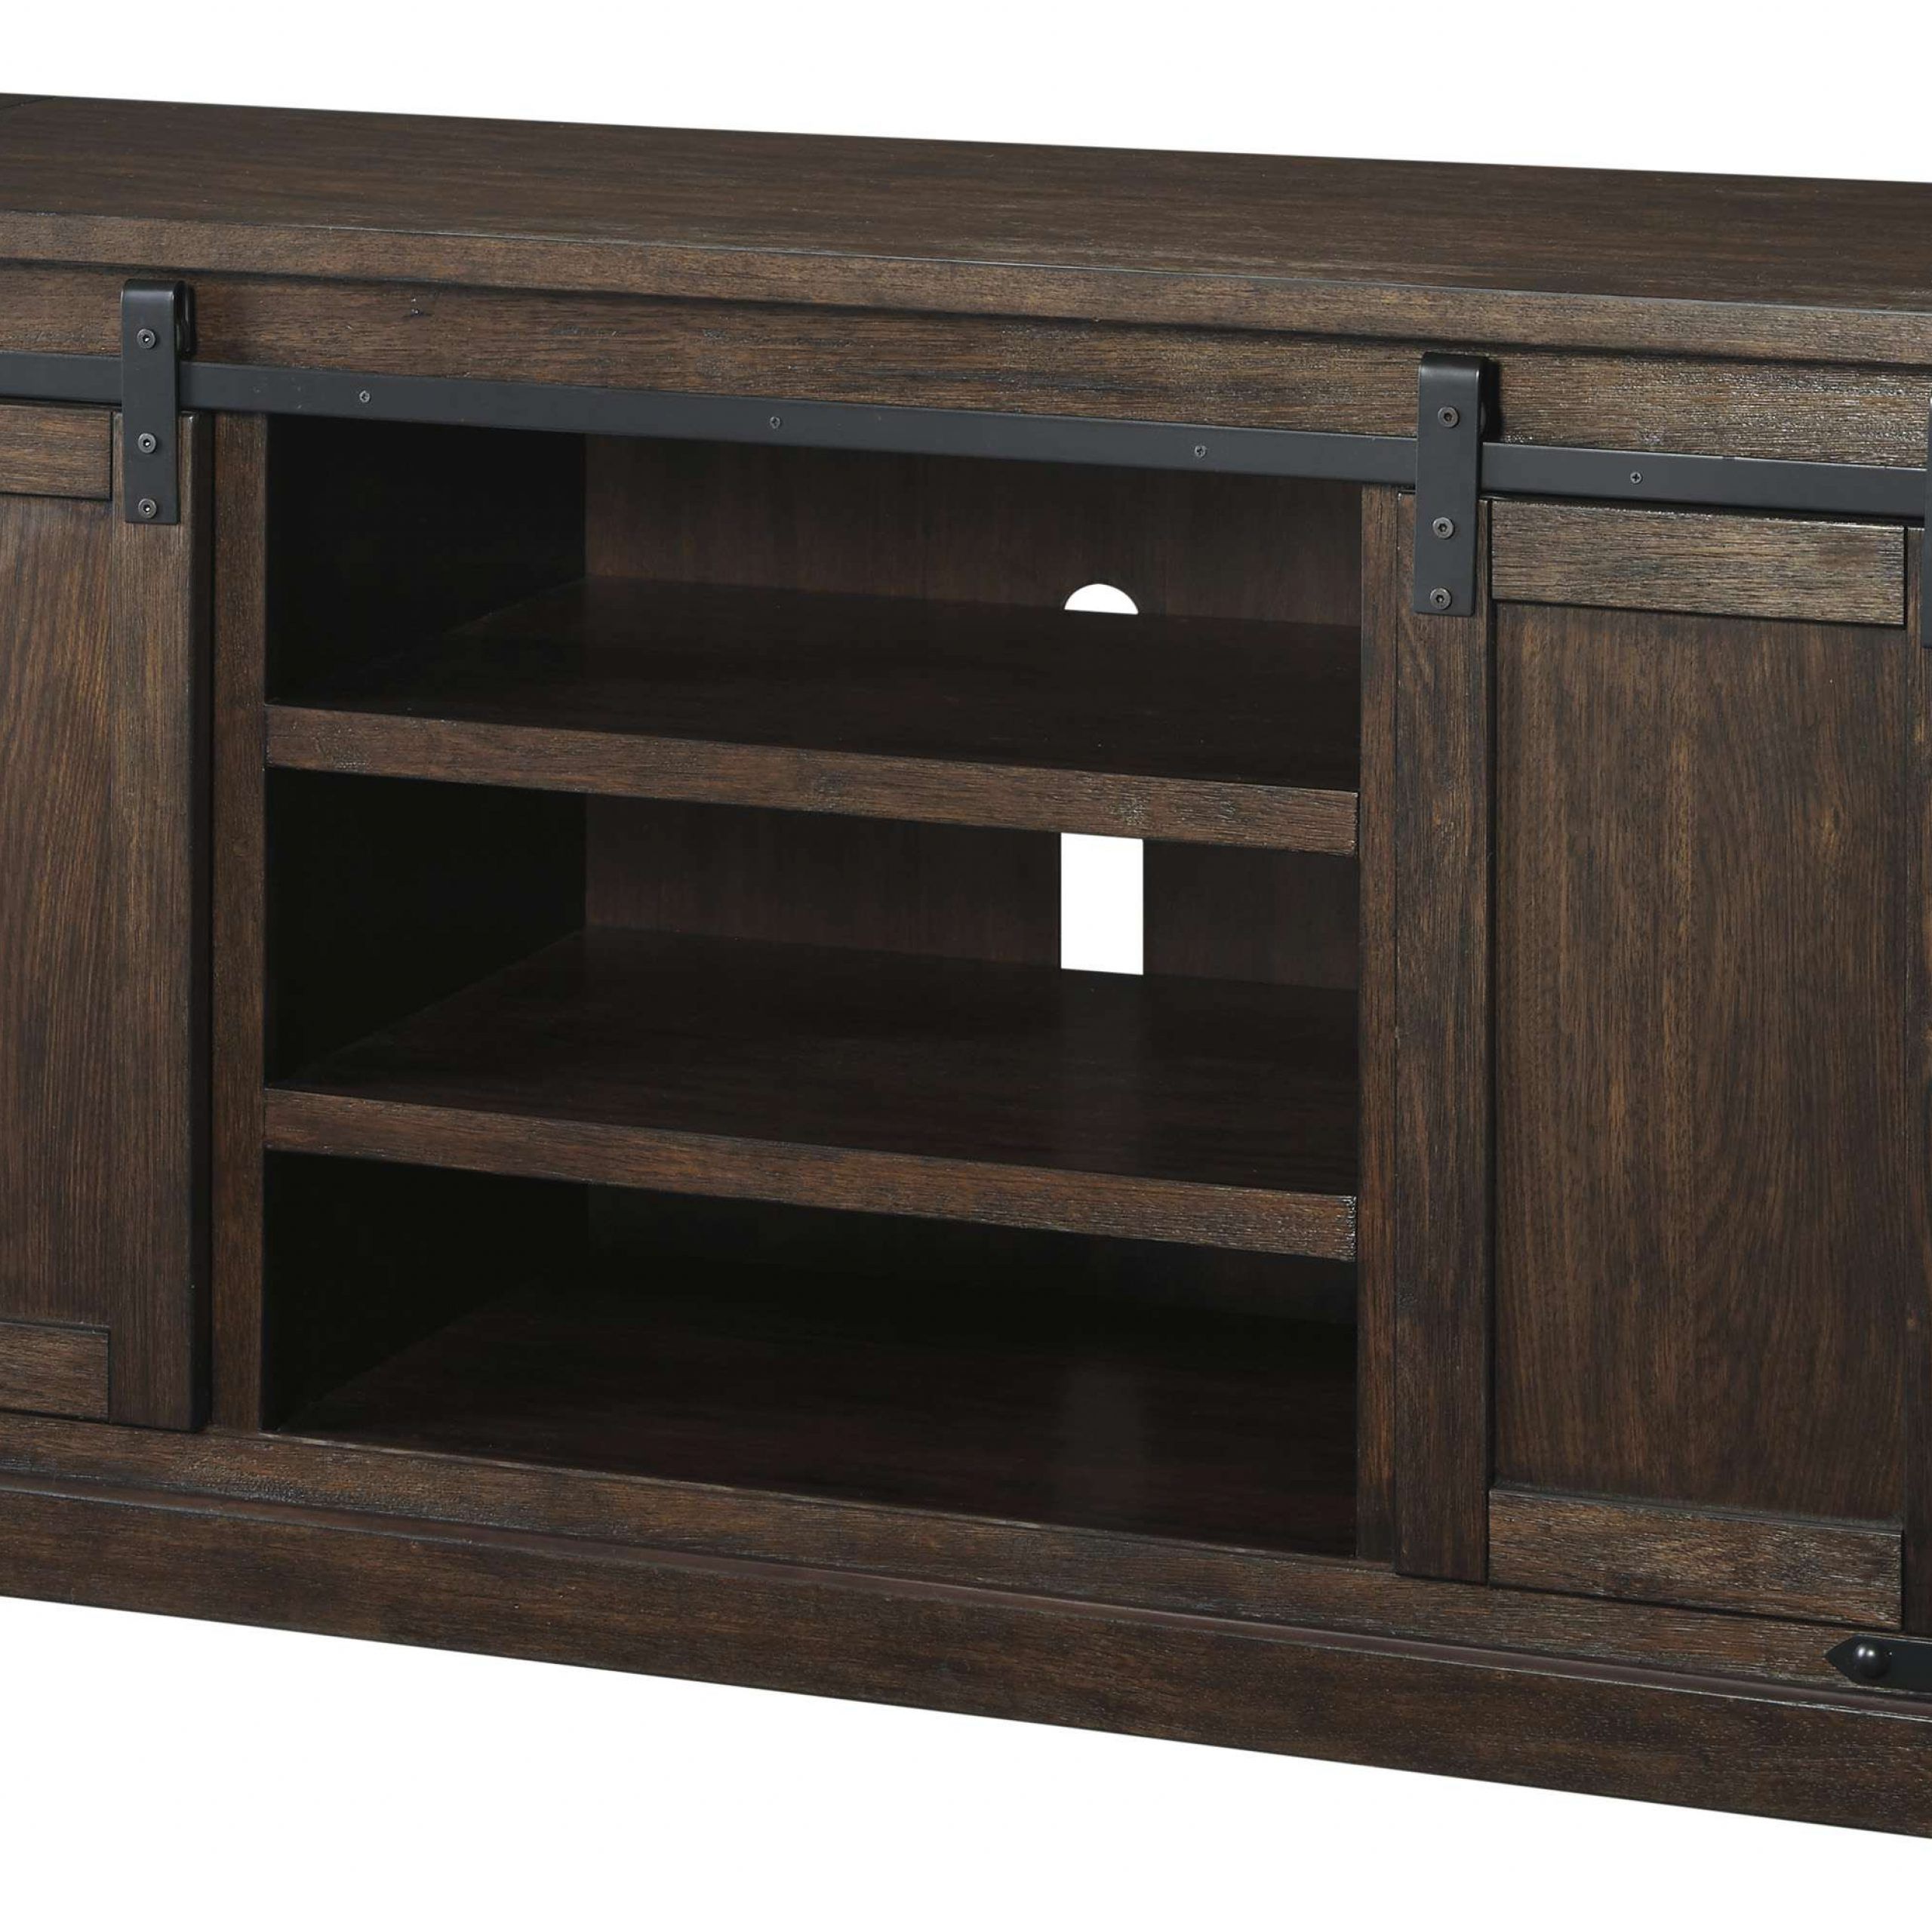 Signature Designashley Budmore Rustic Brown Large Tv Throughout Industrial Tv Stands With Metal Legs Rustic Brown (Gallery 12 of 20)